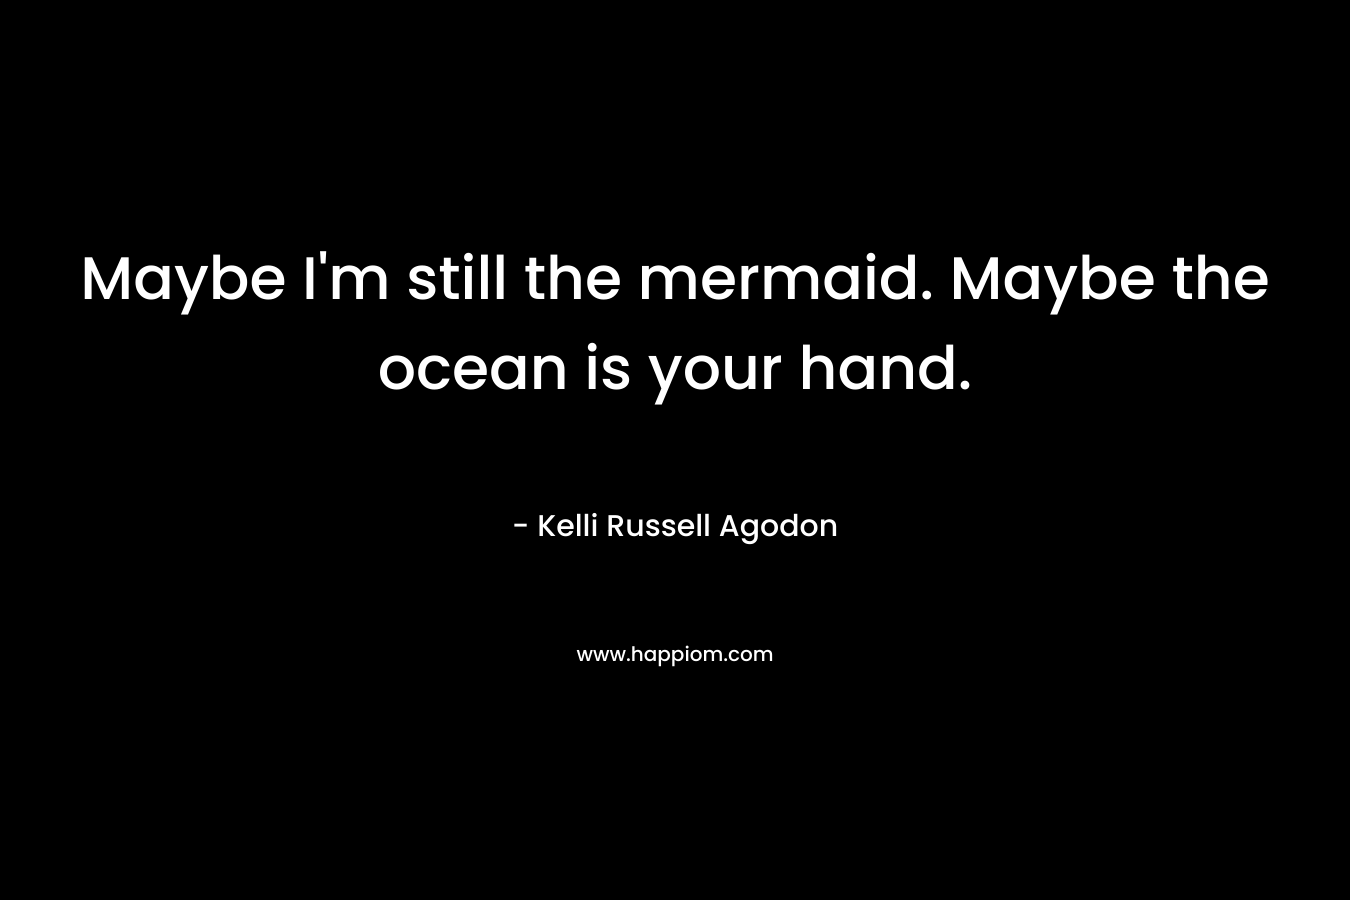 Maybe I’m still the mermaid. Maybe the ocean is your hand. – Kelli Russell Agodon